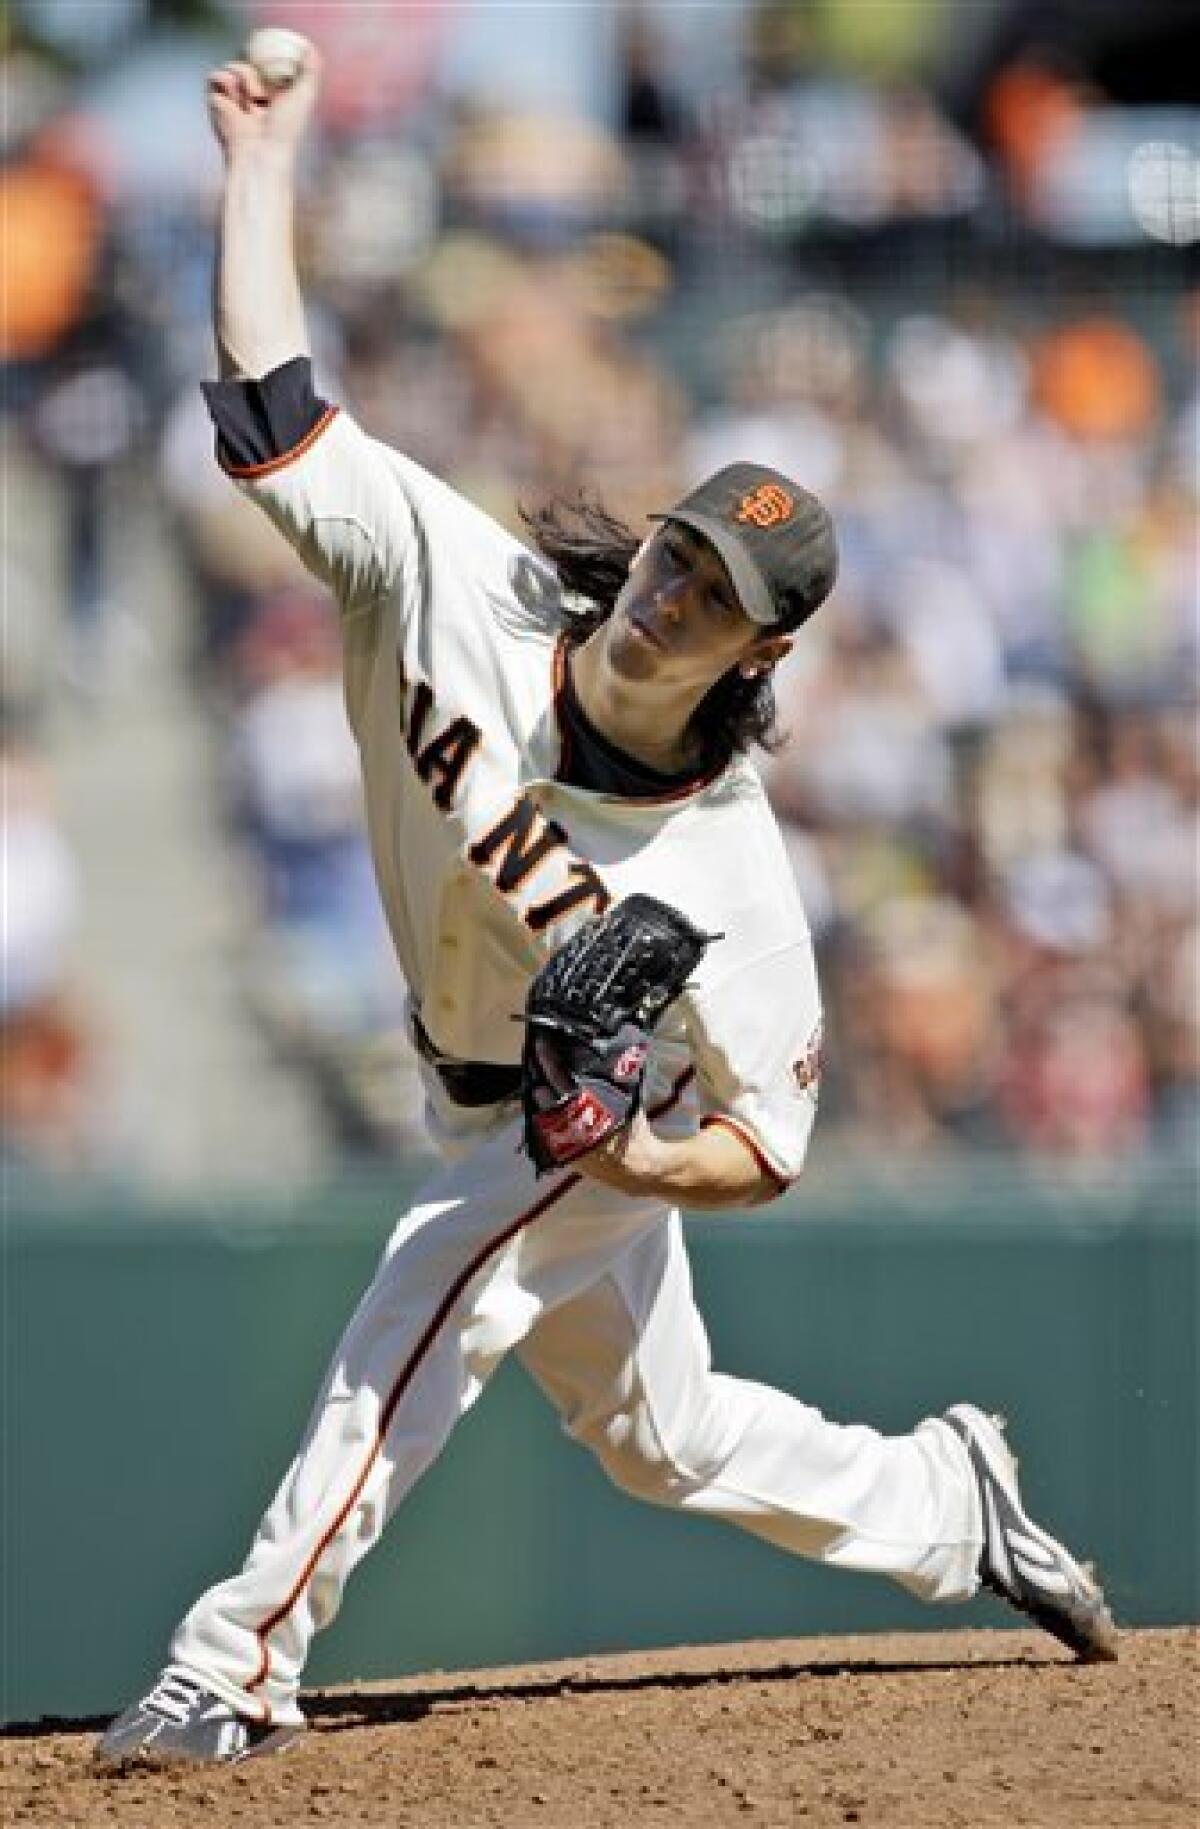 Former San Francisco Giants pitcher Tim Lincecum's wife dies at